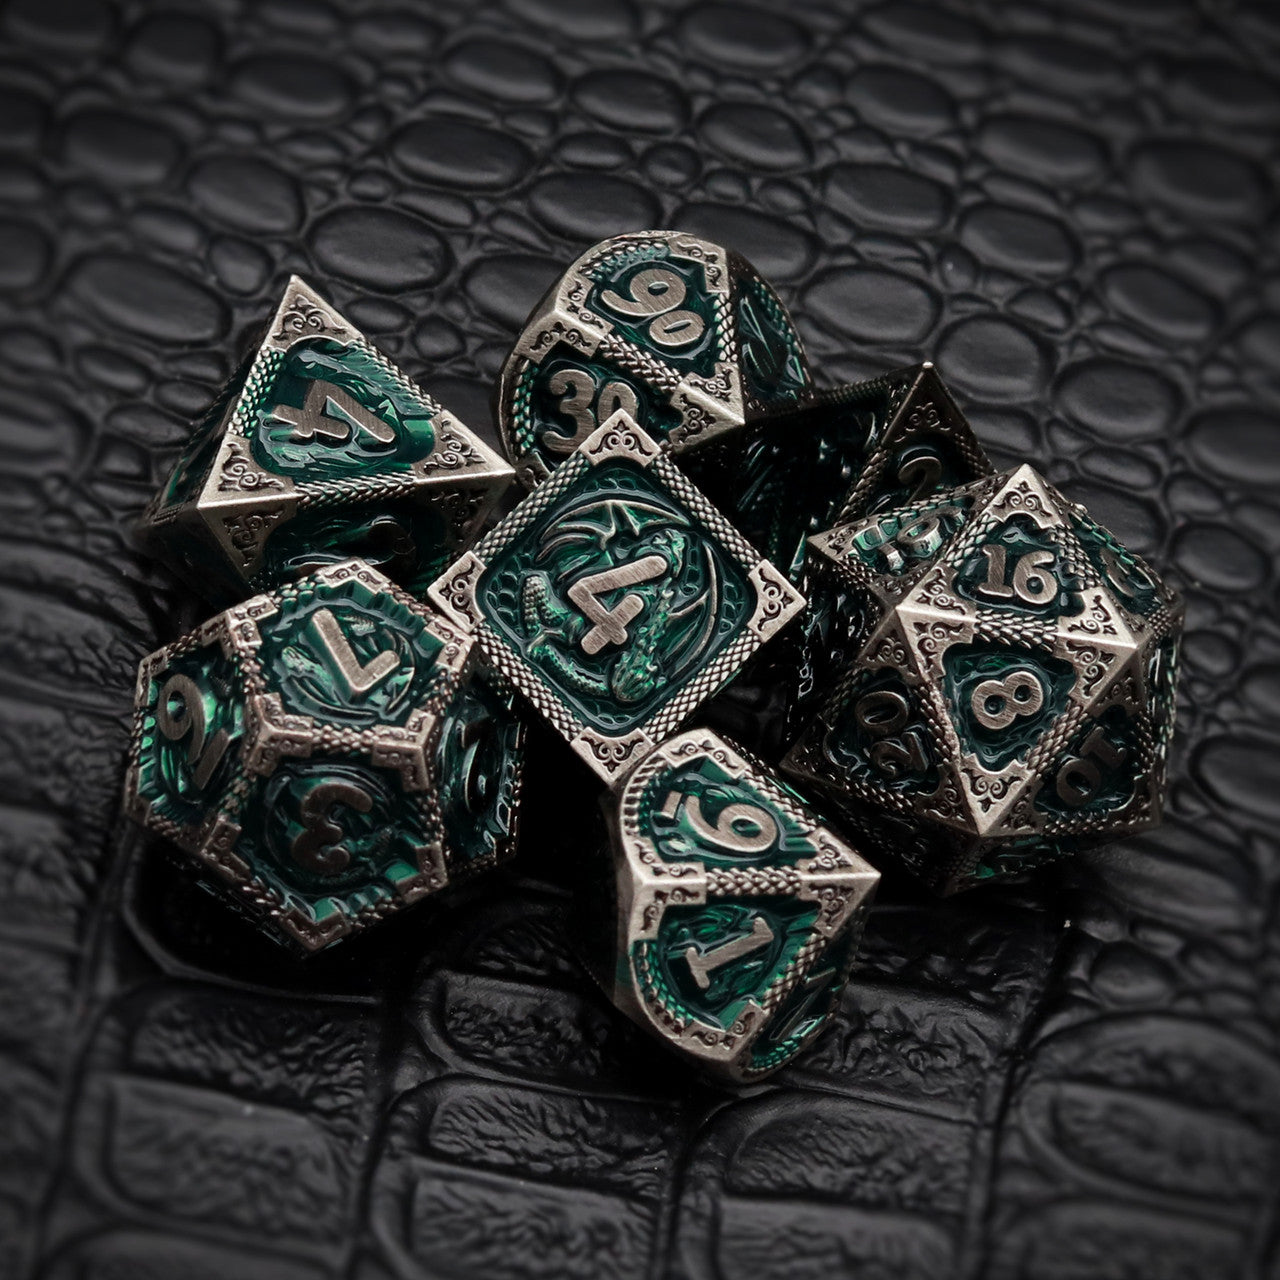 green metal dnd dice set with dragon pattern and dragon skin leather dice bag